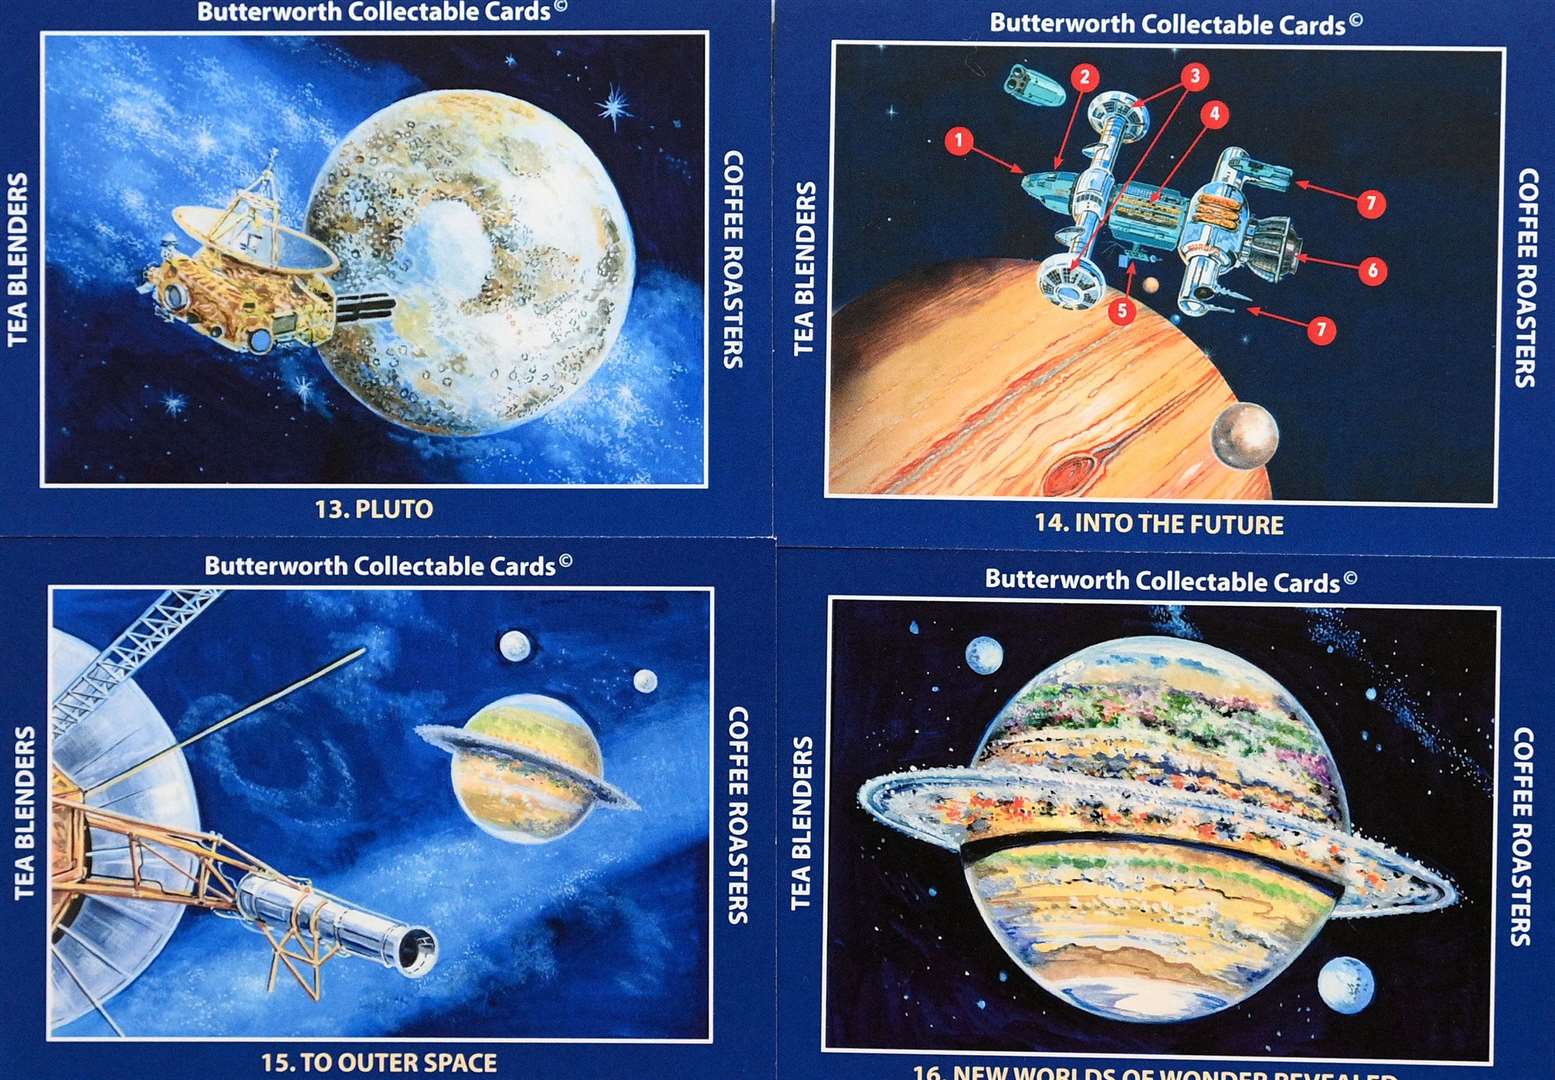 A space theme decorated the last set of cards